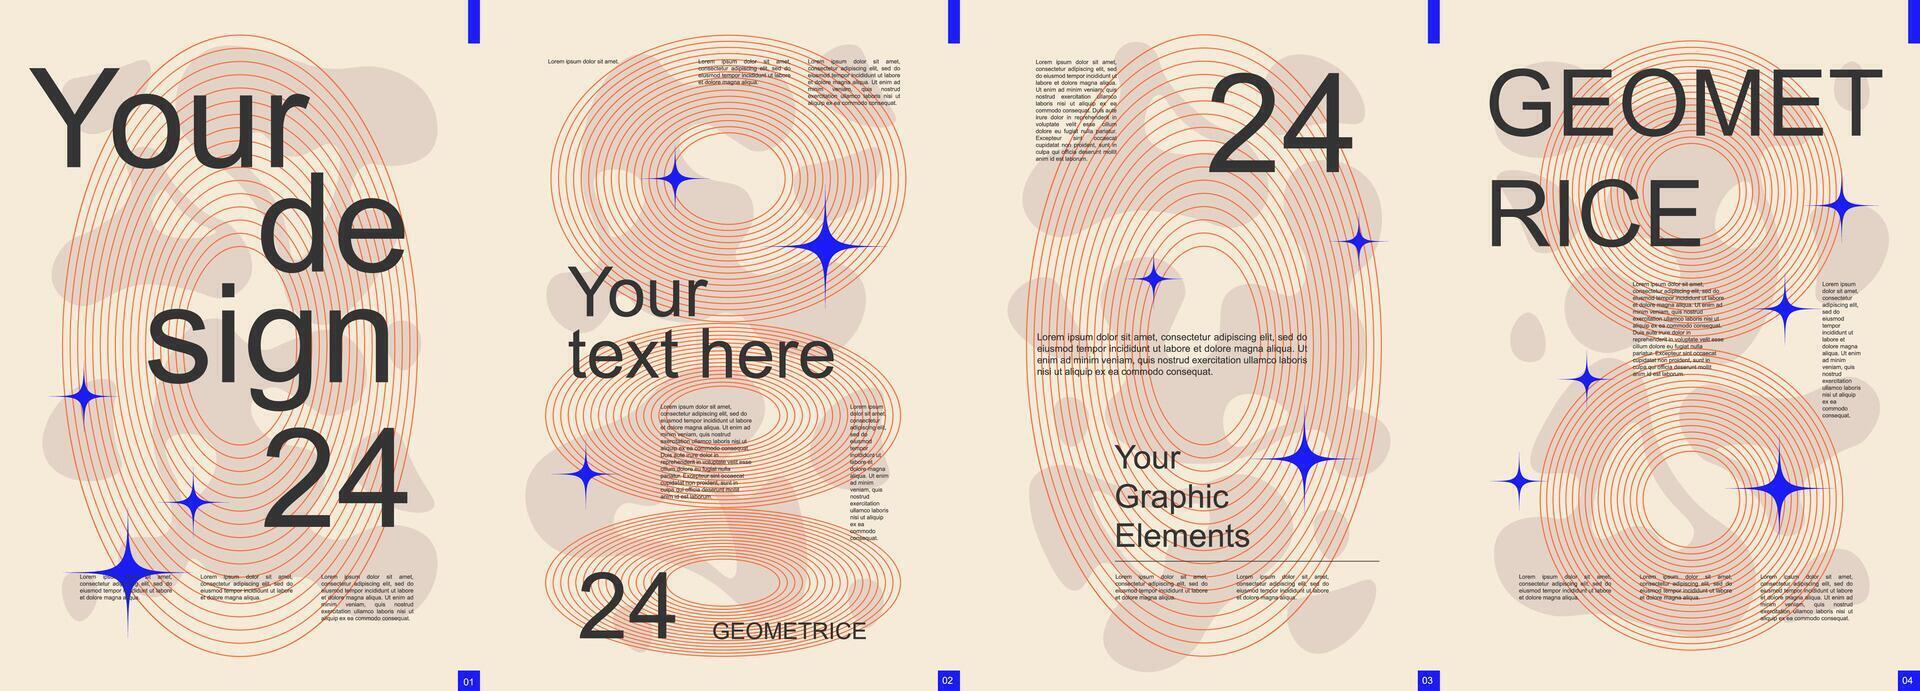 Geometric modern banner with trendy minimalist typography design. Poster templates with dynamic grids of fractal lines in circle and round forms, liquid shapes and text elements. Vector illustration.